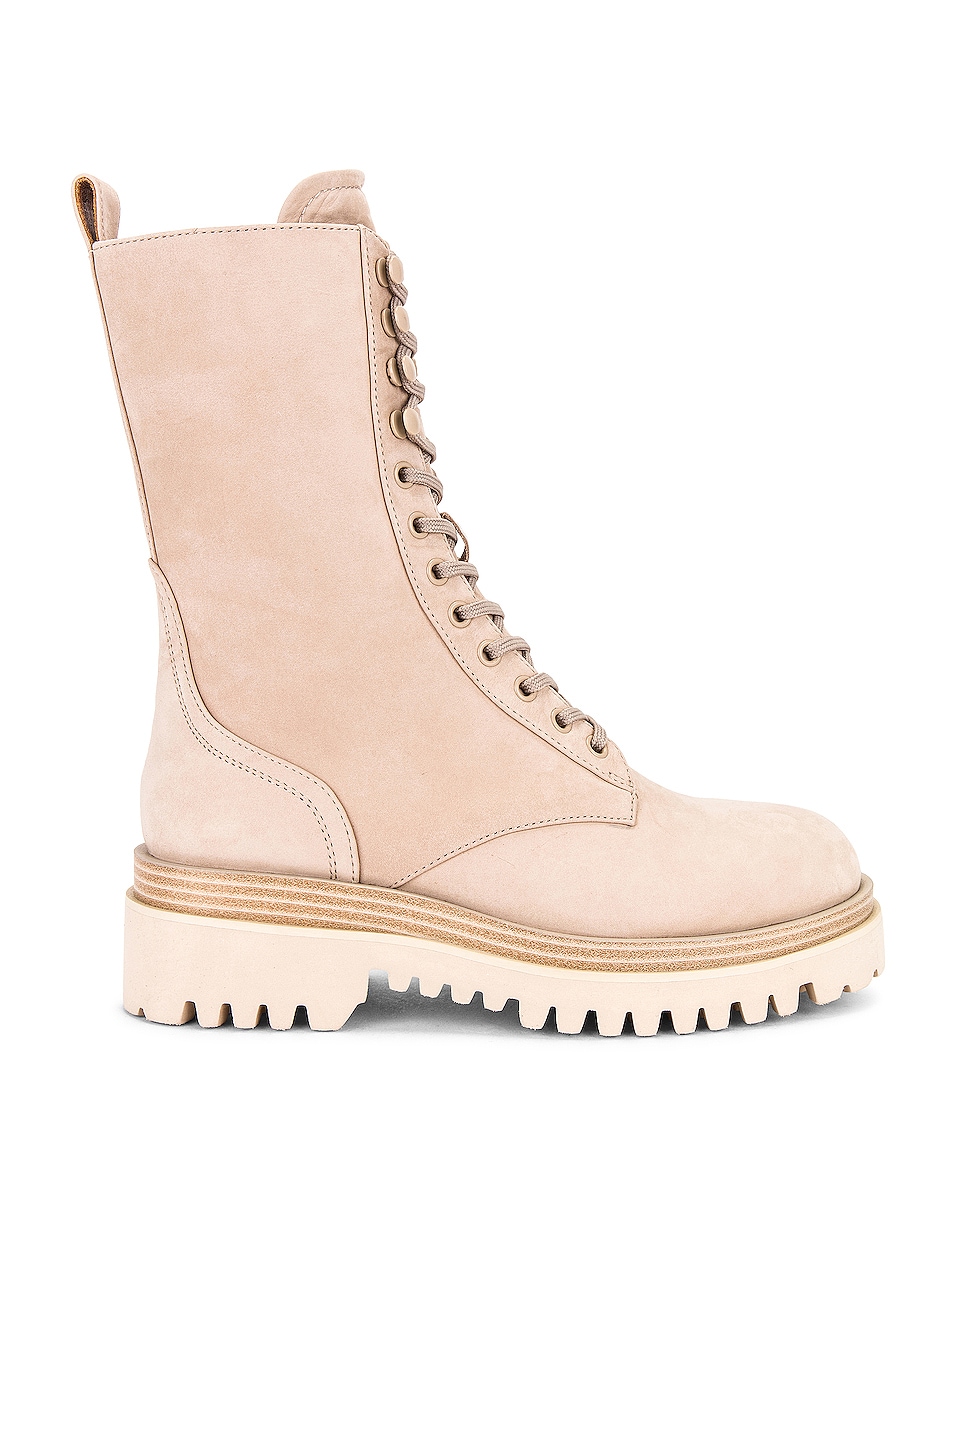 Lola Lace Up Boot in Nude